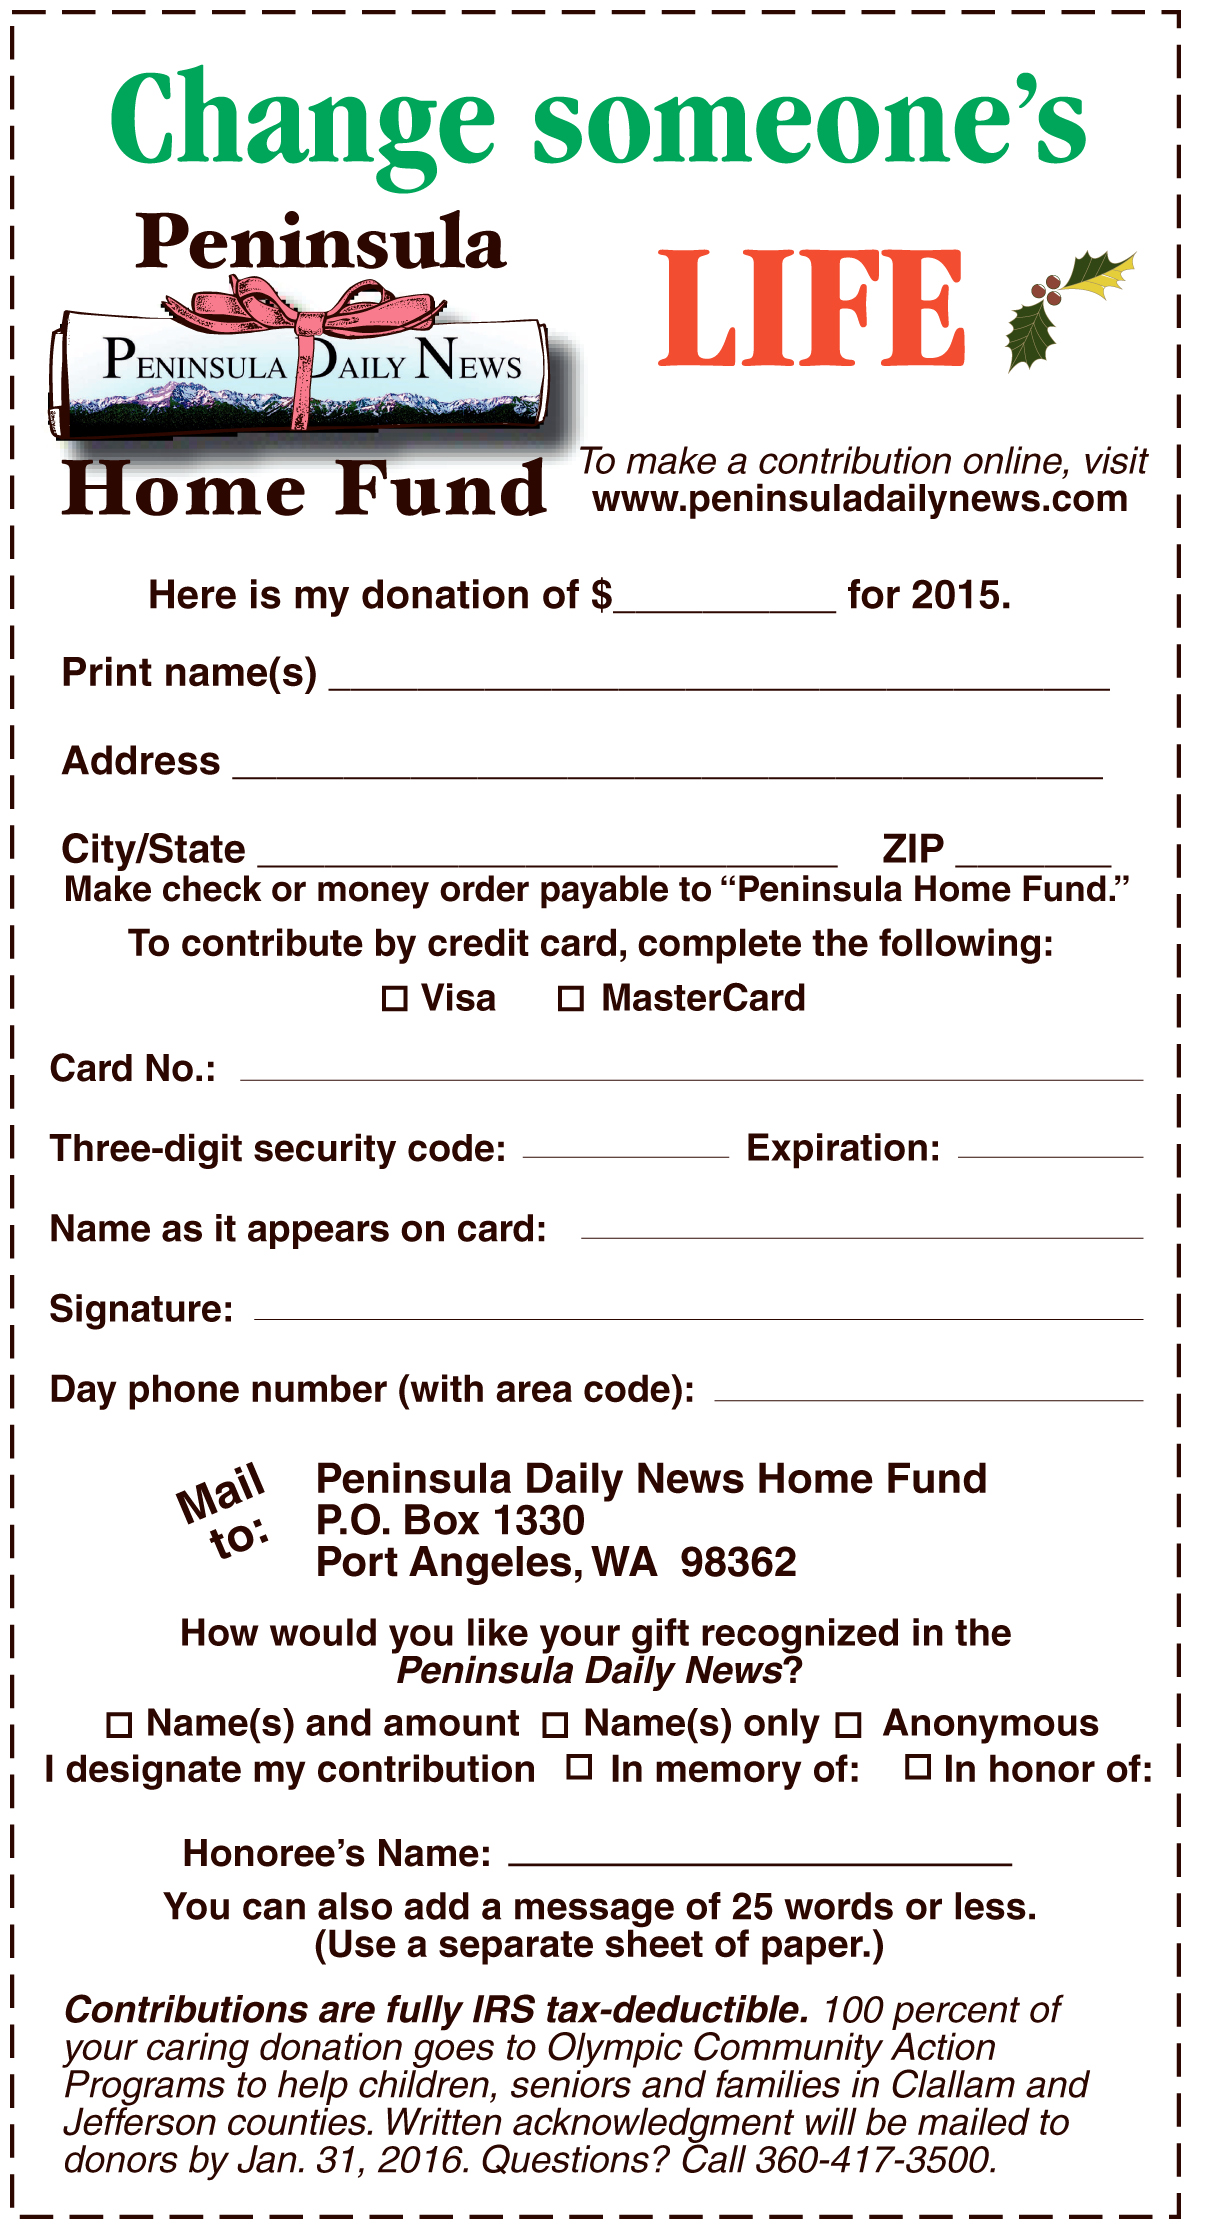 You can donate to the Peninsula Home Fund by using this coupon. Or you can donate online at https://secure.peninsuladailynews.com/homefund ()